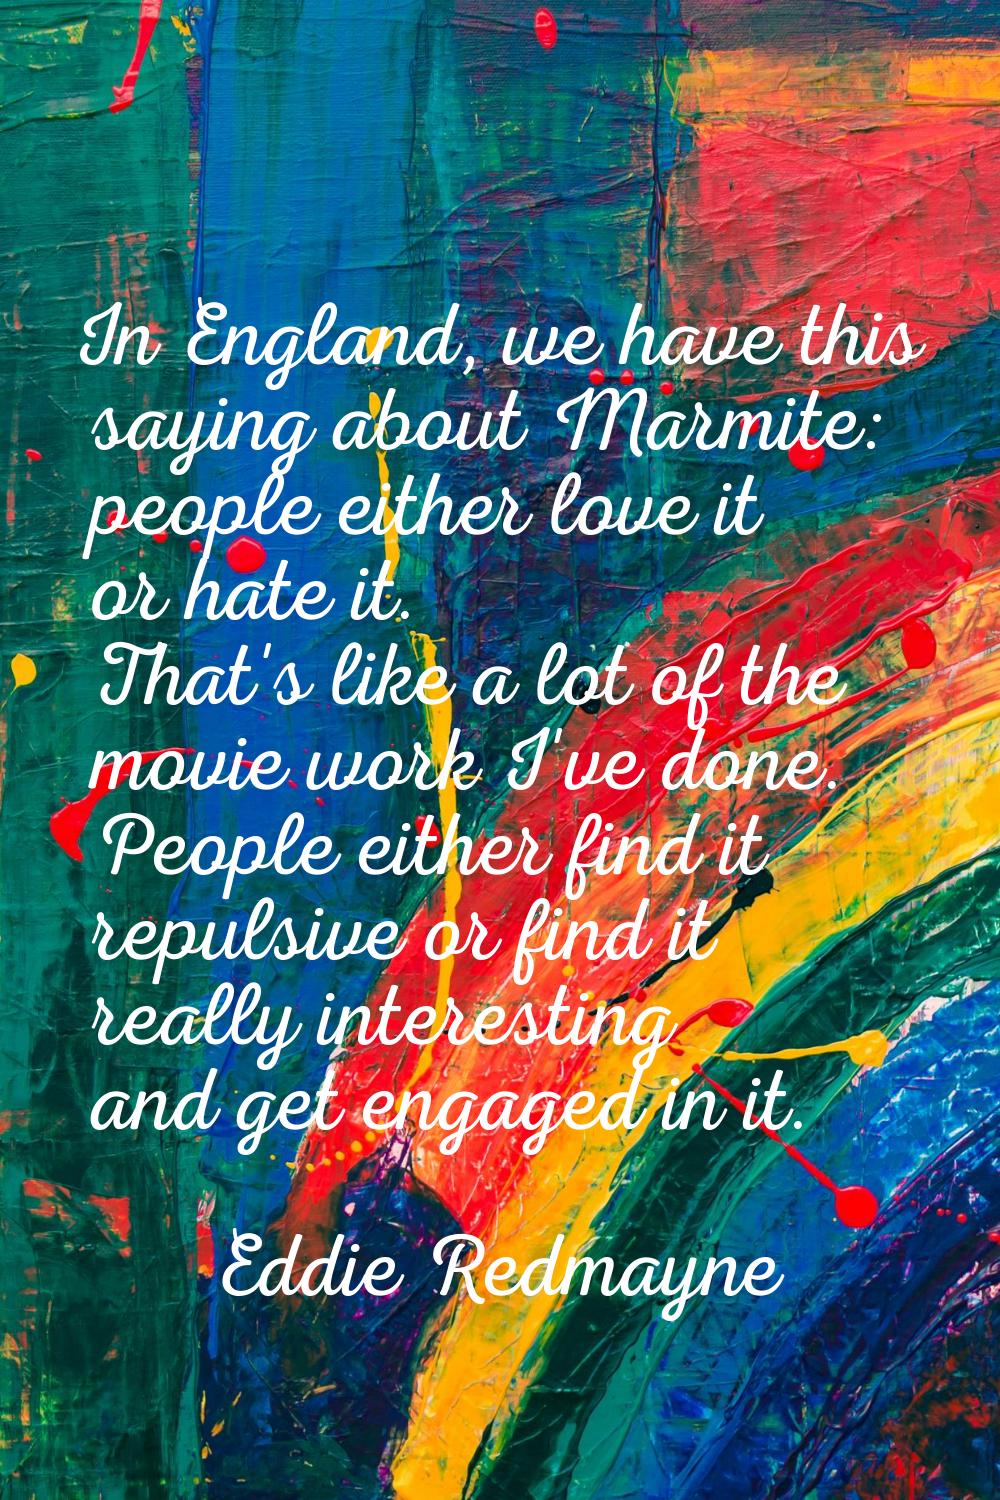 In England, we have this saying about Marmite: people either love it or hate it. That's like a lot 